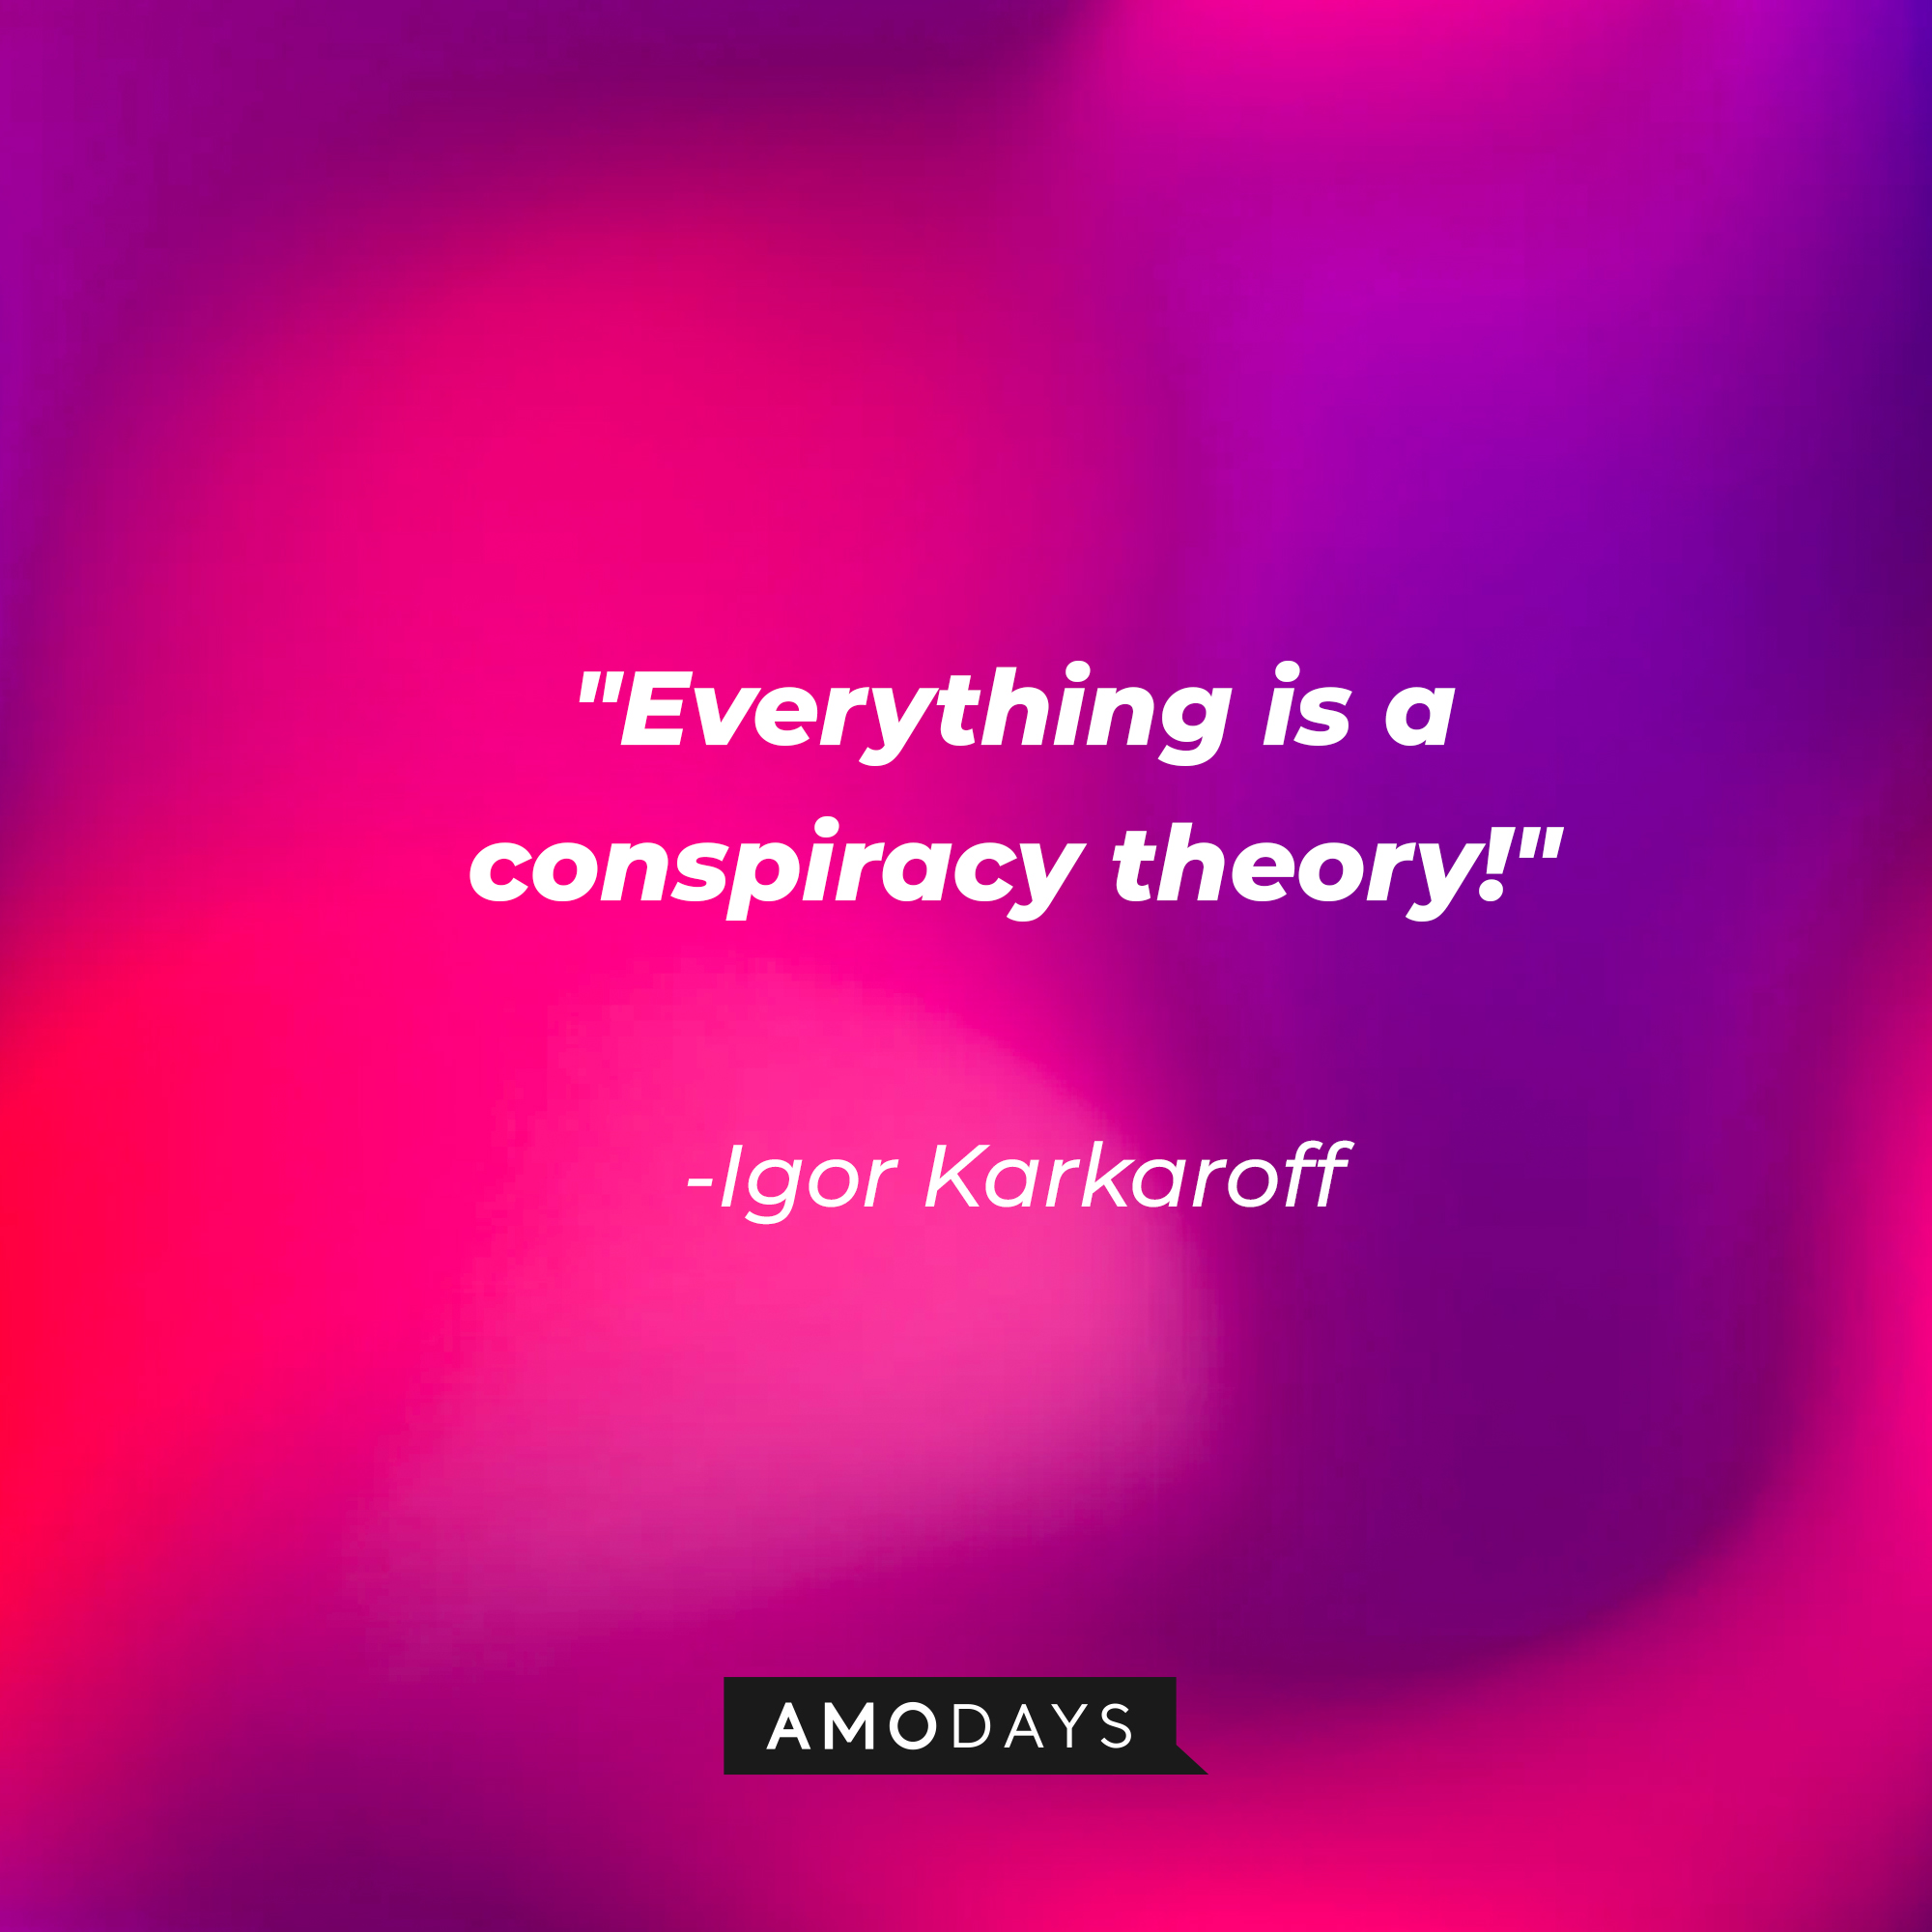 Igor Karkaroff's quote: "Everything is a conspiracy theory!" | Image: Amodays